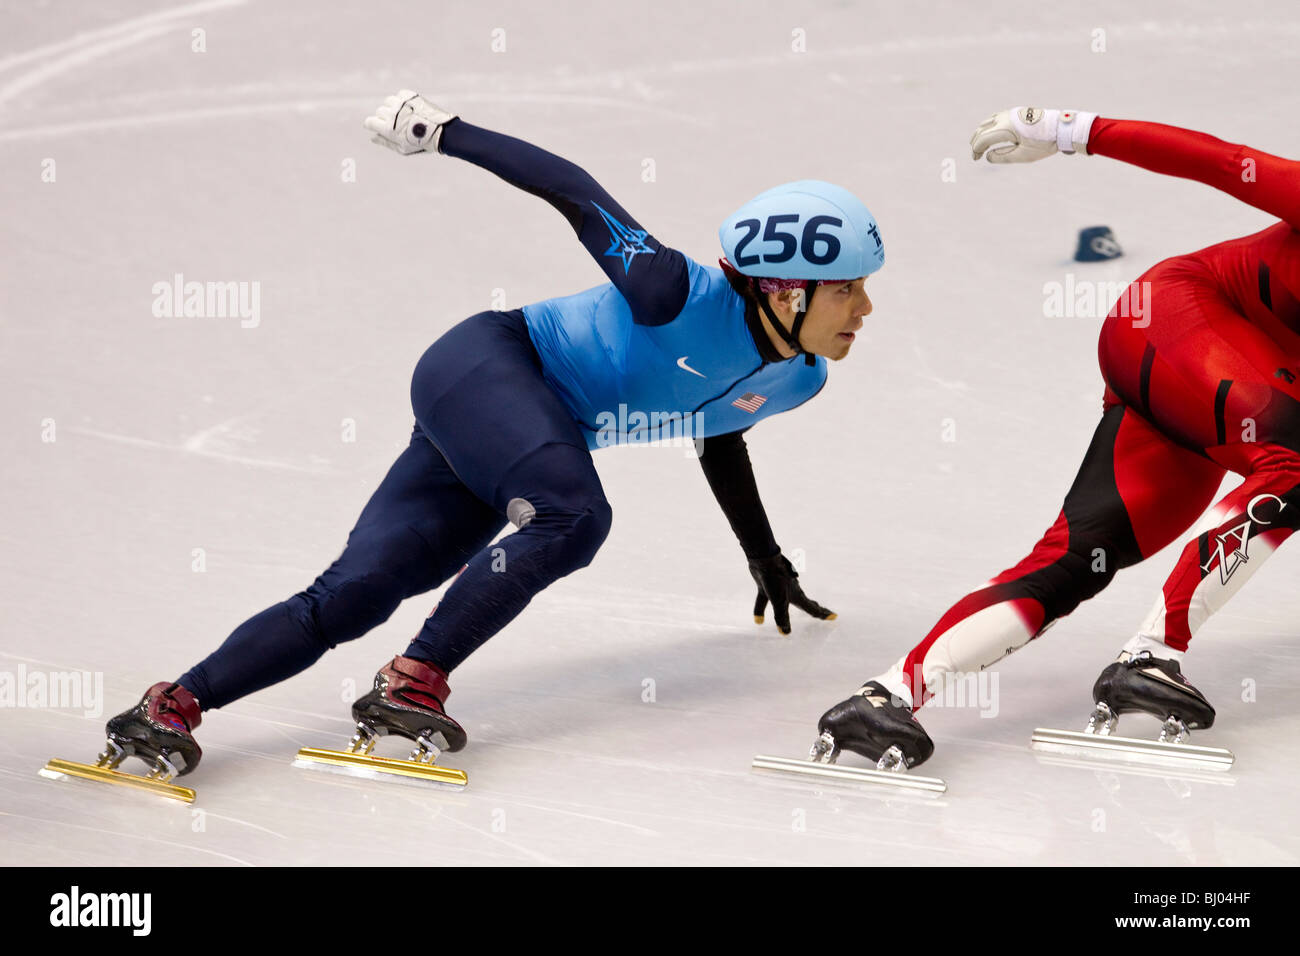 Apolo Anton Ohno (USA) competing in the Short Track Speed Skating Men's 500m event at the 2010 Olympic Winter Games Stock Photo